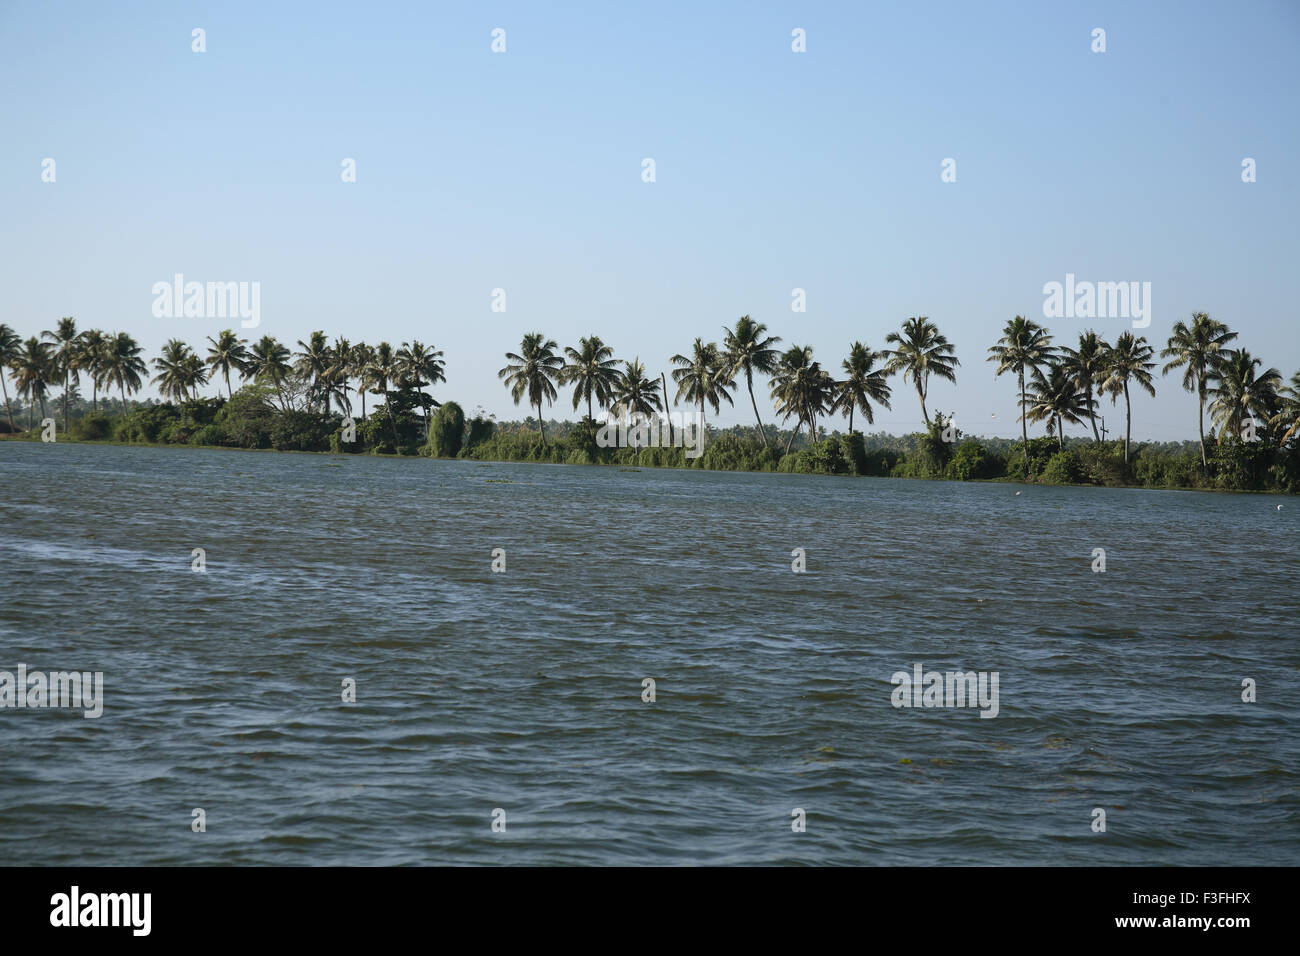 Backwaters from Kottayam to Alleppey ; Coconut trees in line ; Alappuzha ; Kerala ; India. Stock Photo